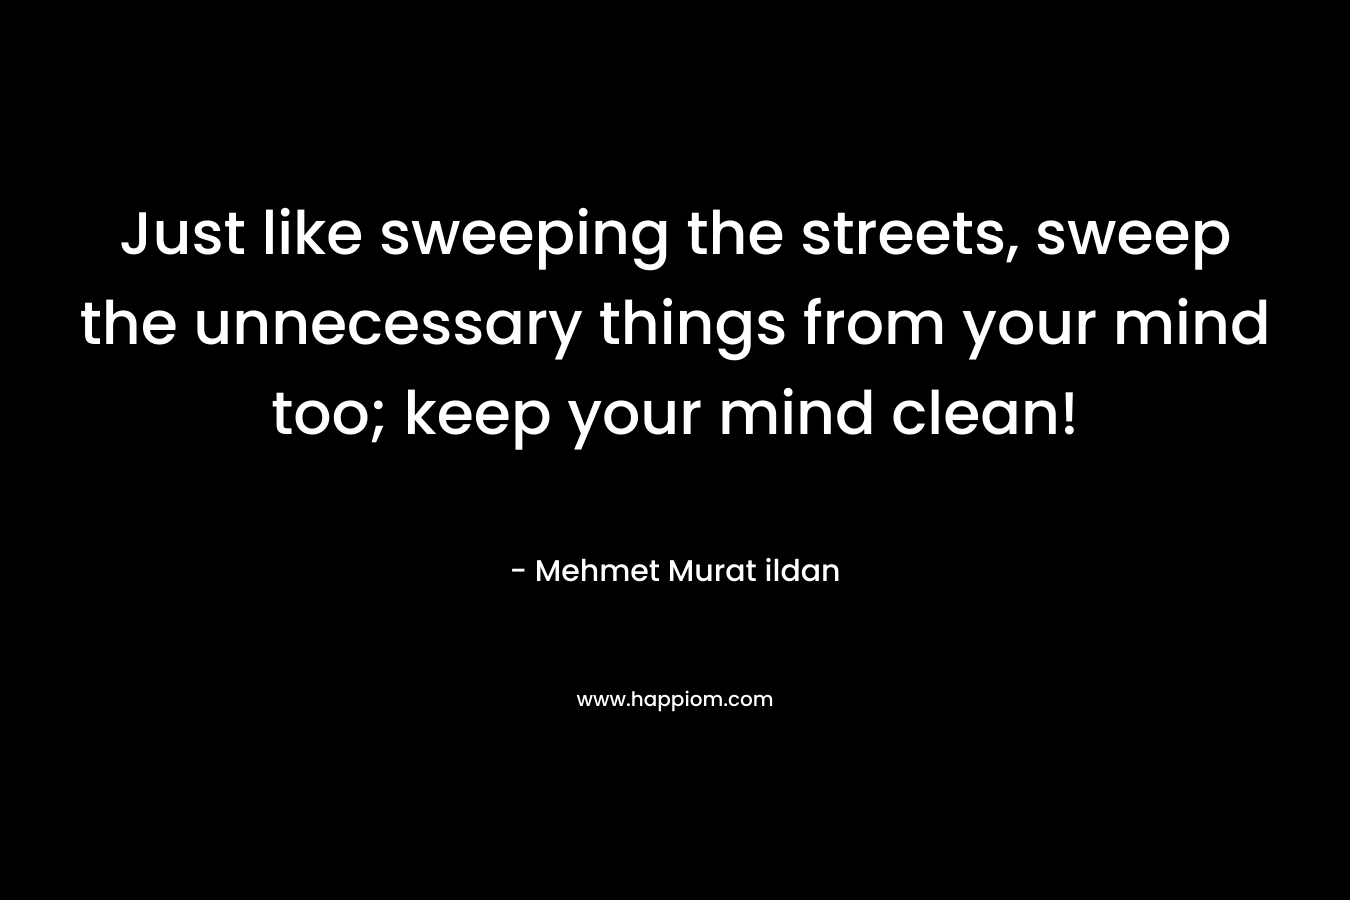 Just like sweeping the streets, sweep the unnecessary things from your mind too; keep your mind clean!